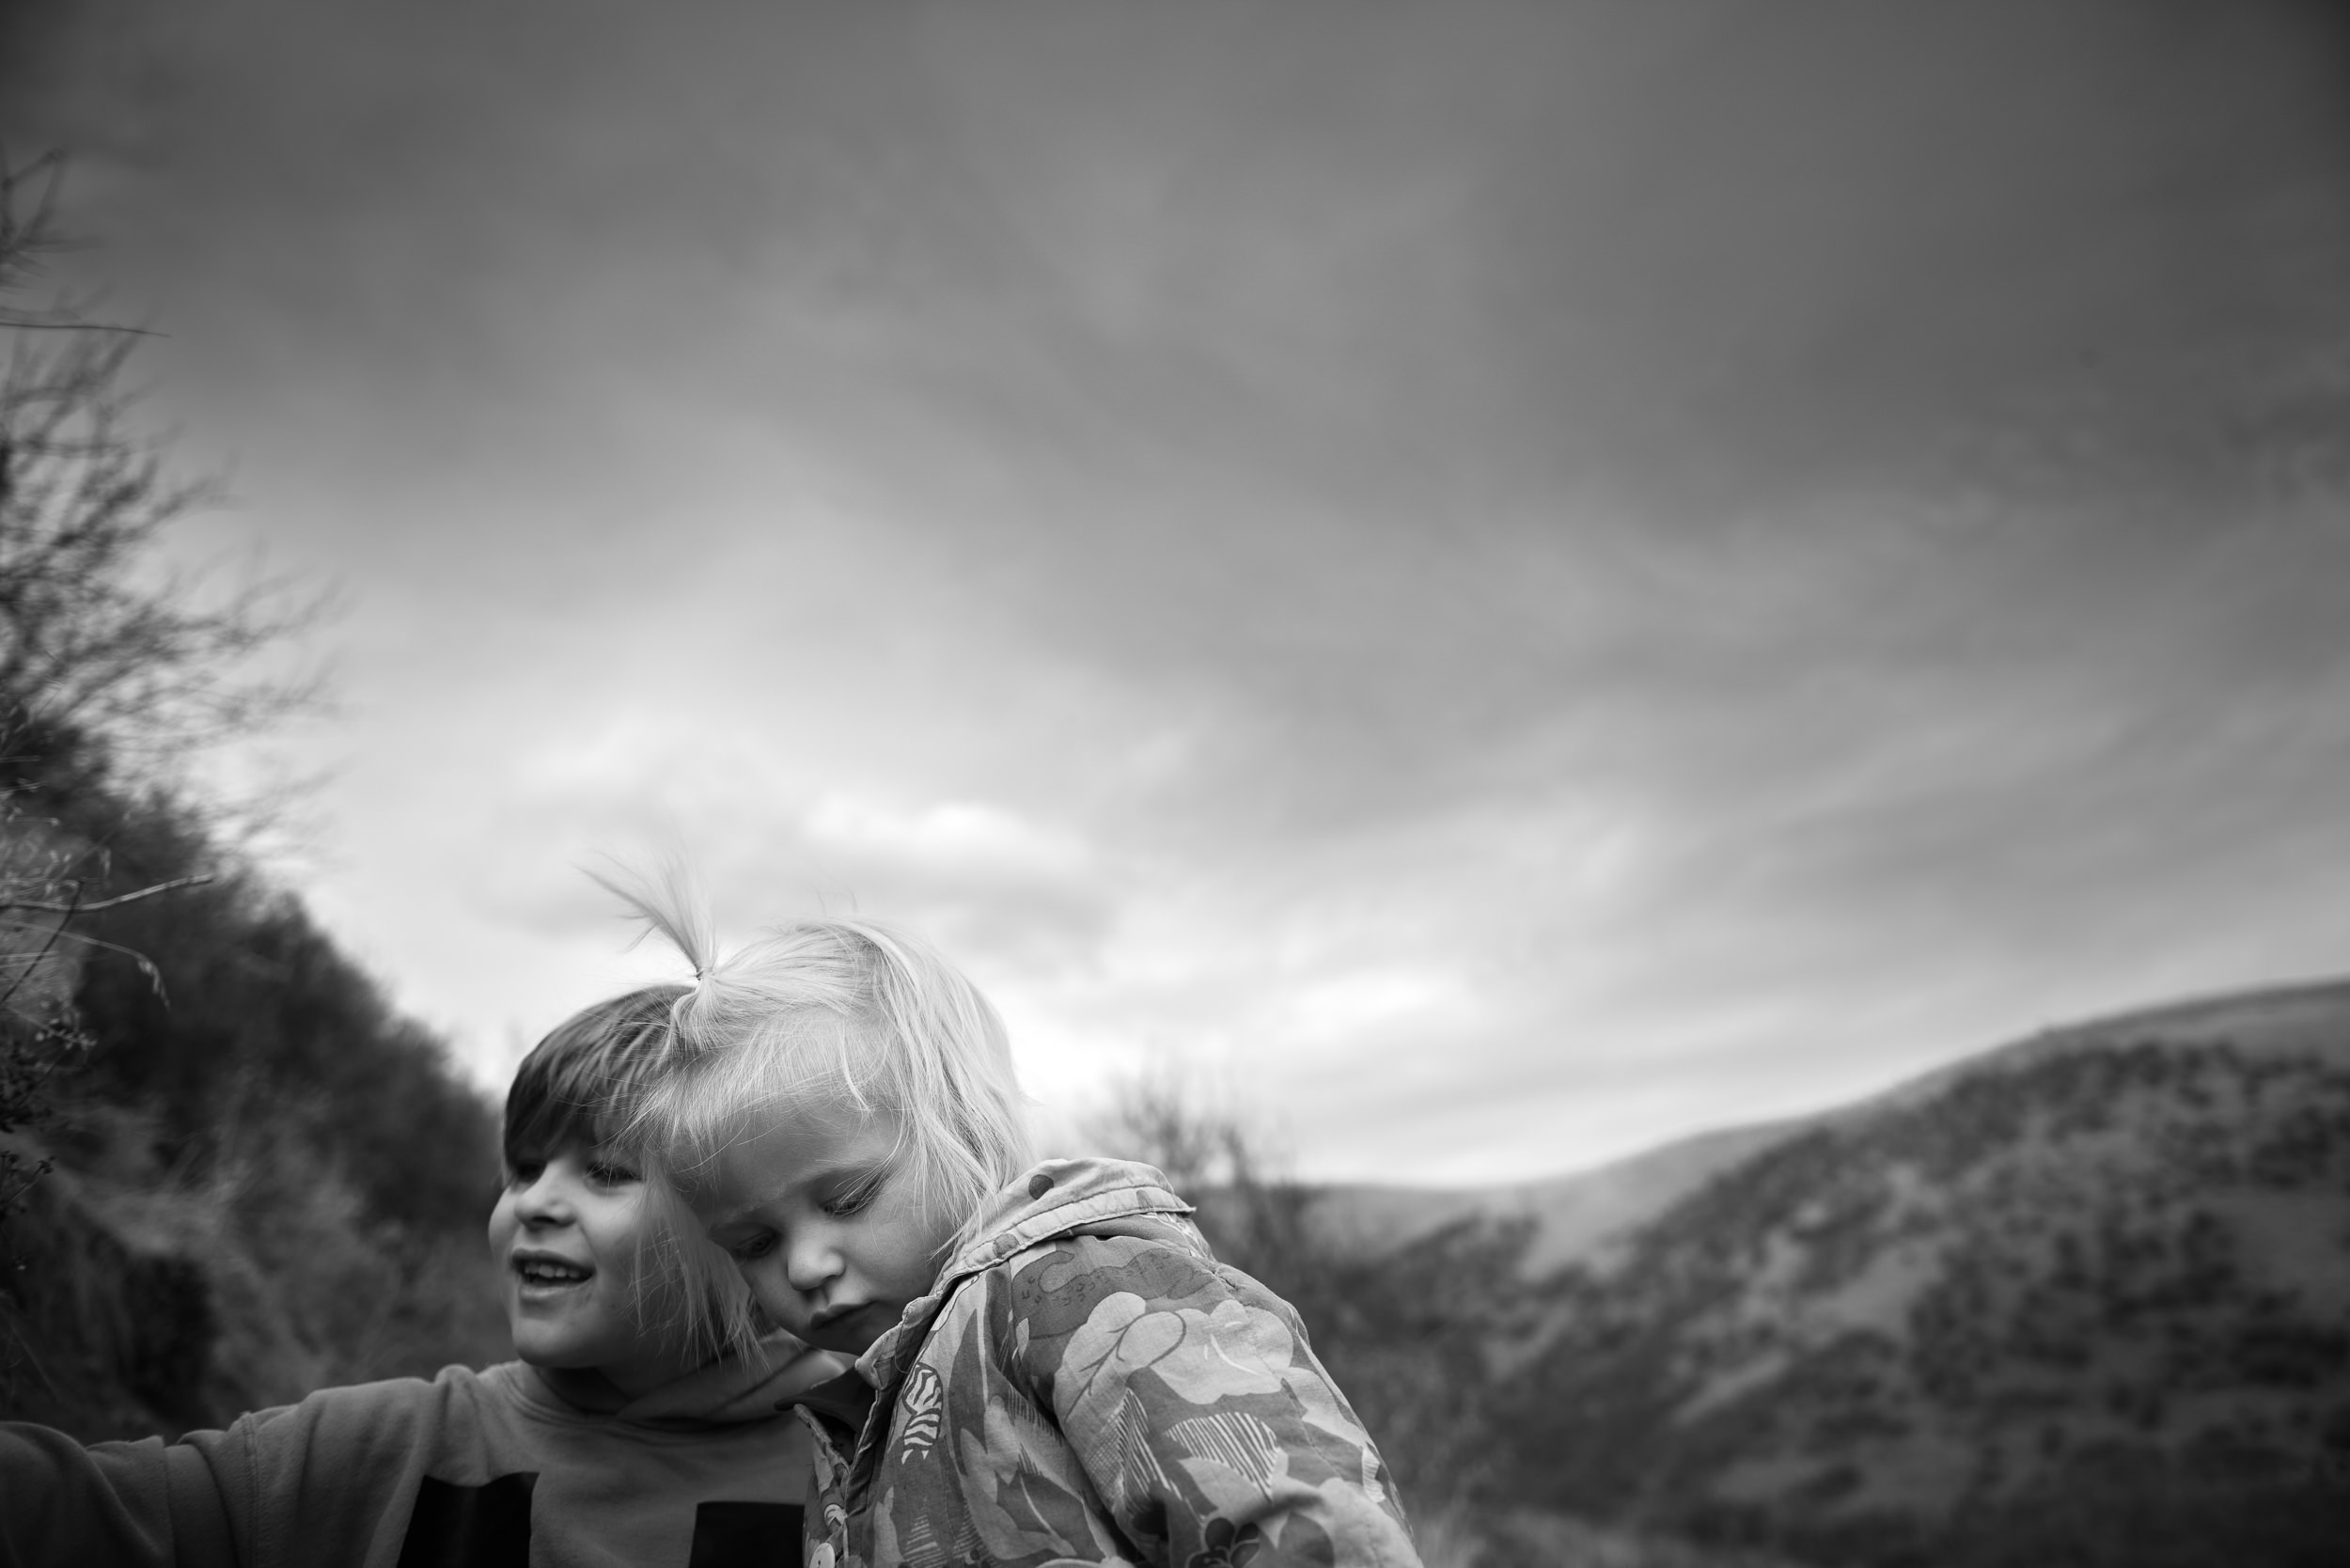 Blog - Molly Rees Photo - Black and White Documentary Childhood Photography - children on green mountain hiking trail in denver colorado by M. Menschel